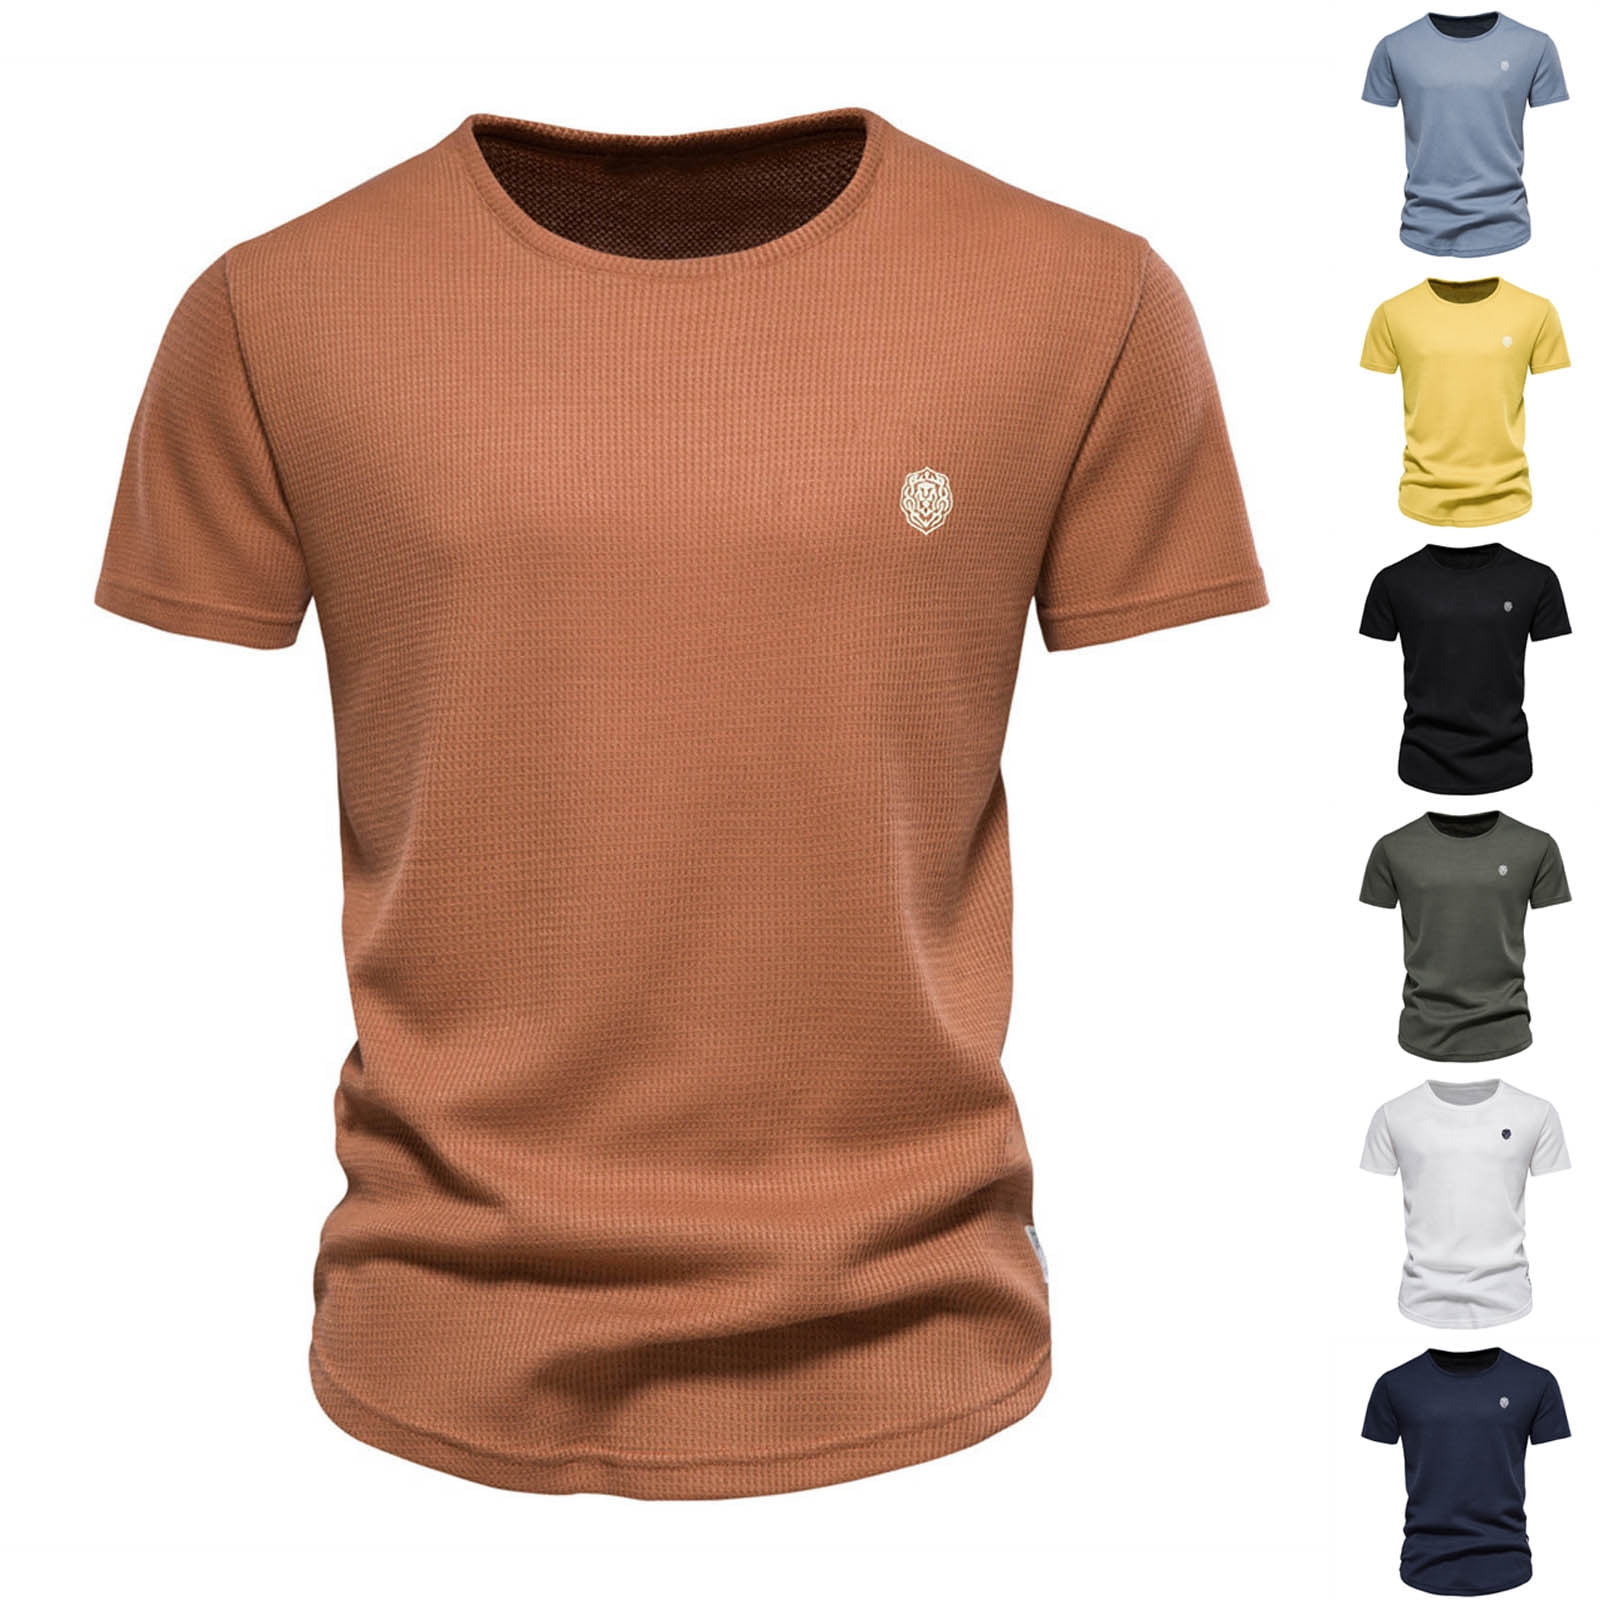 symoid Workout T-shirts for Men Big and Tall- Big and Tall Summer  Round-Neck Casual Value Army Green Men's Tee Shirts Size S